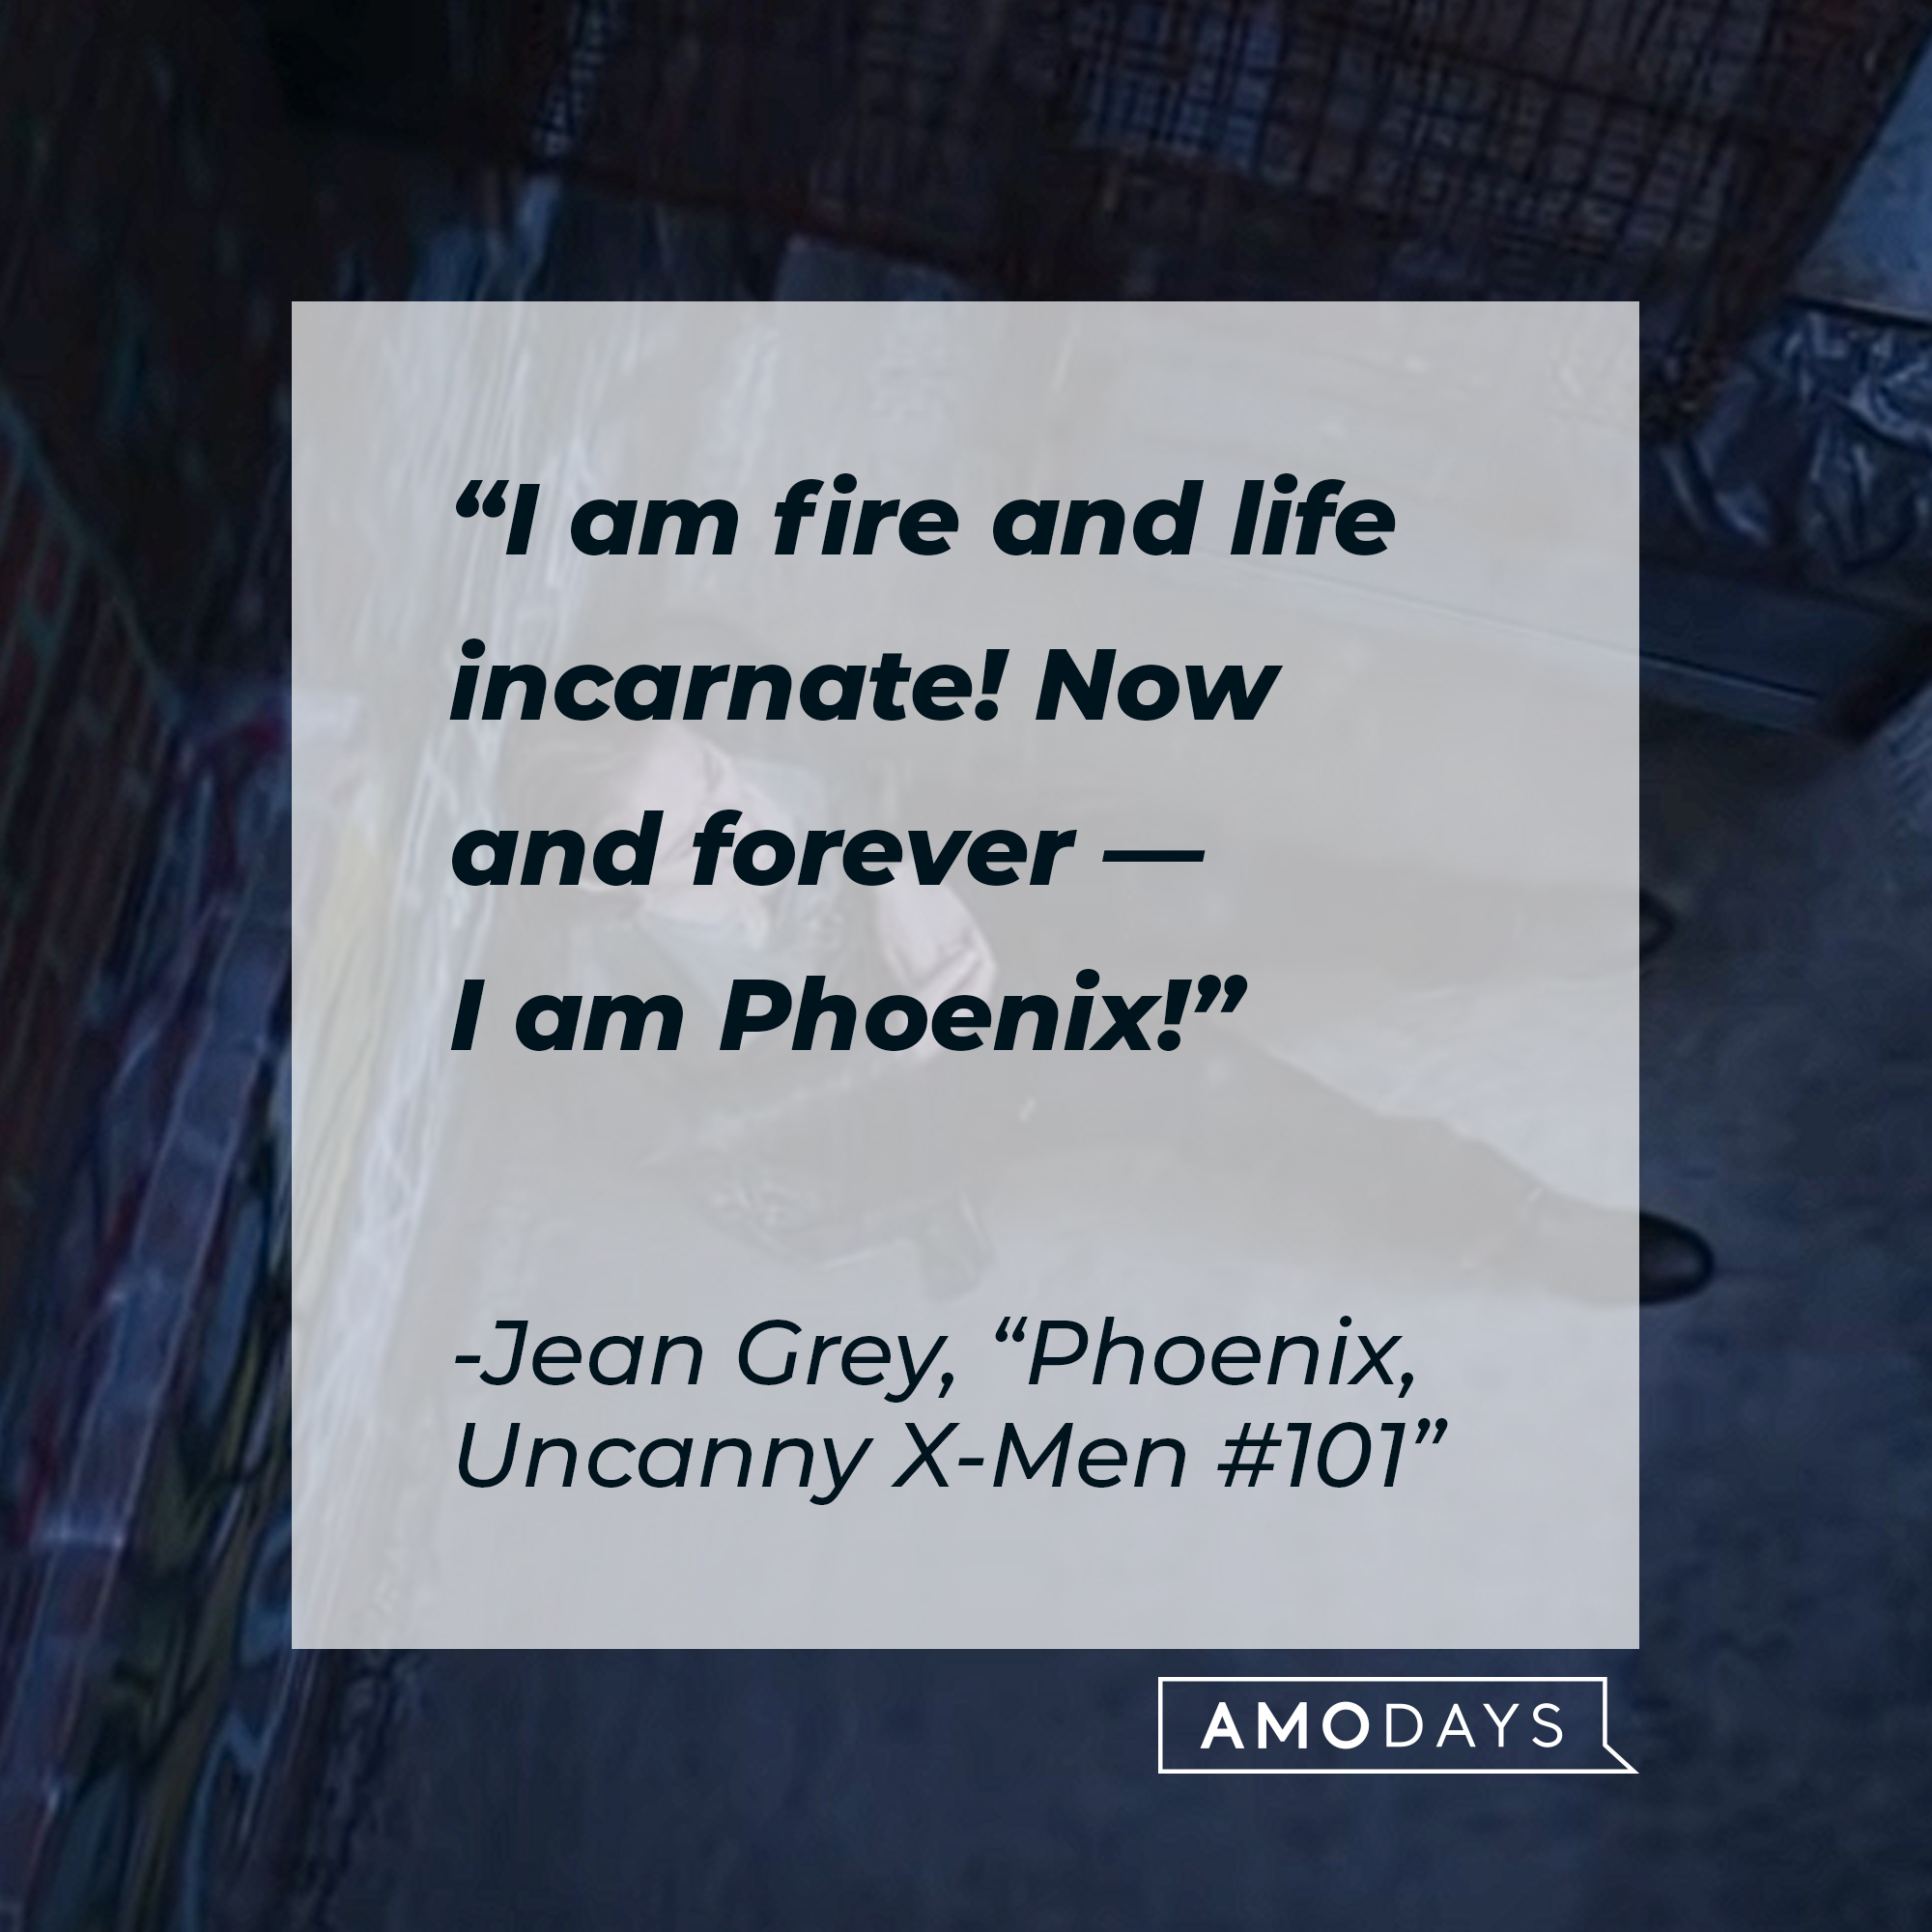 Jean Grey’s quote: "I am fire and life incarnate! Now and forever — I am Phoenix!"  | Image: Youtube.com/20thCenturyStudios